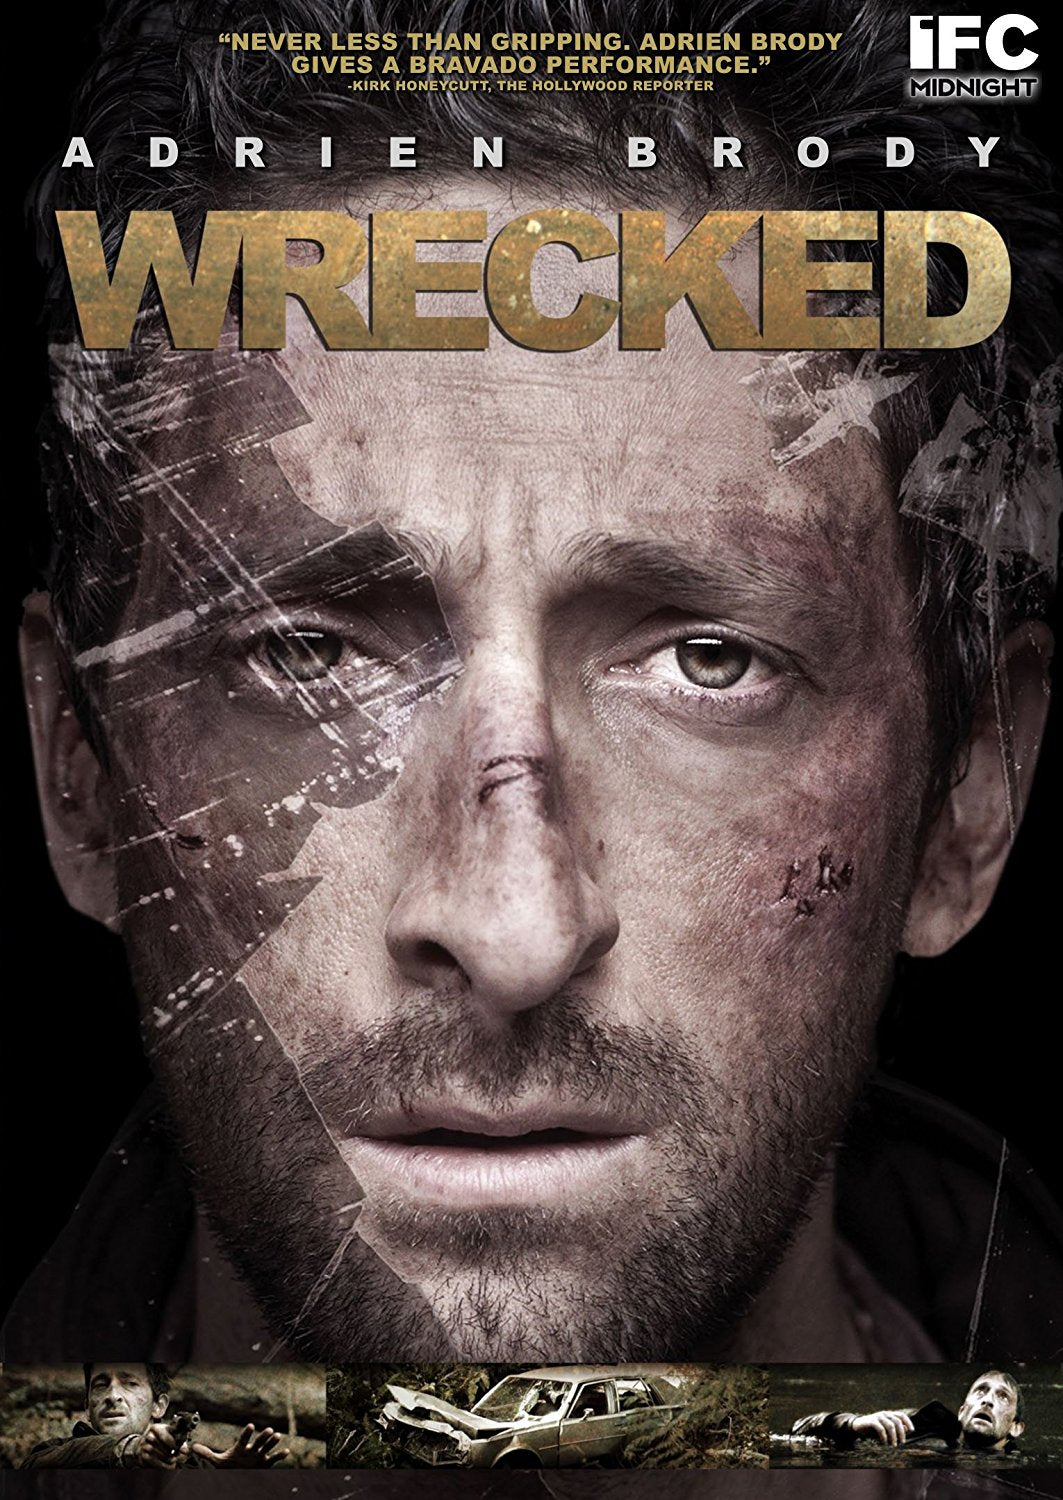 Wrecked DVD